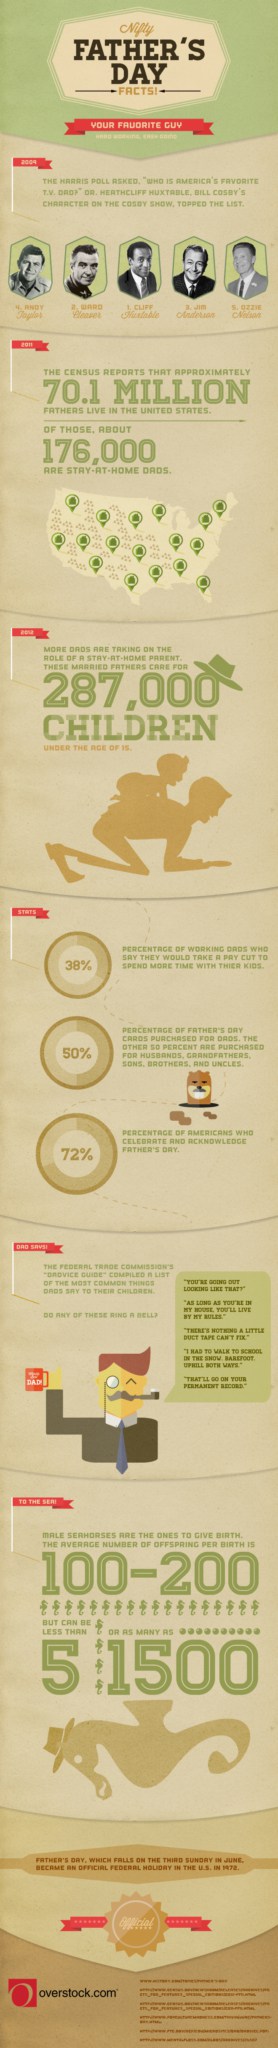 Father's Day Infographic from Overstock.com